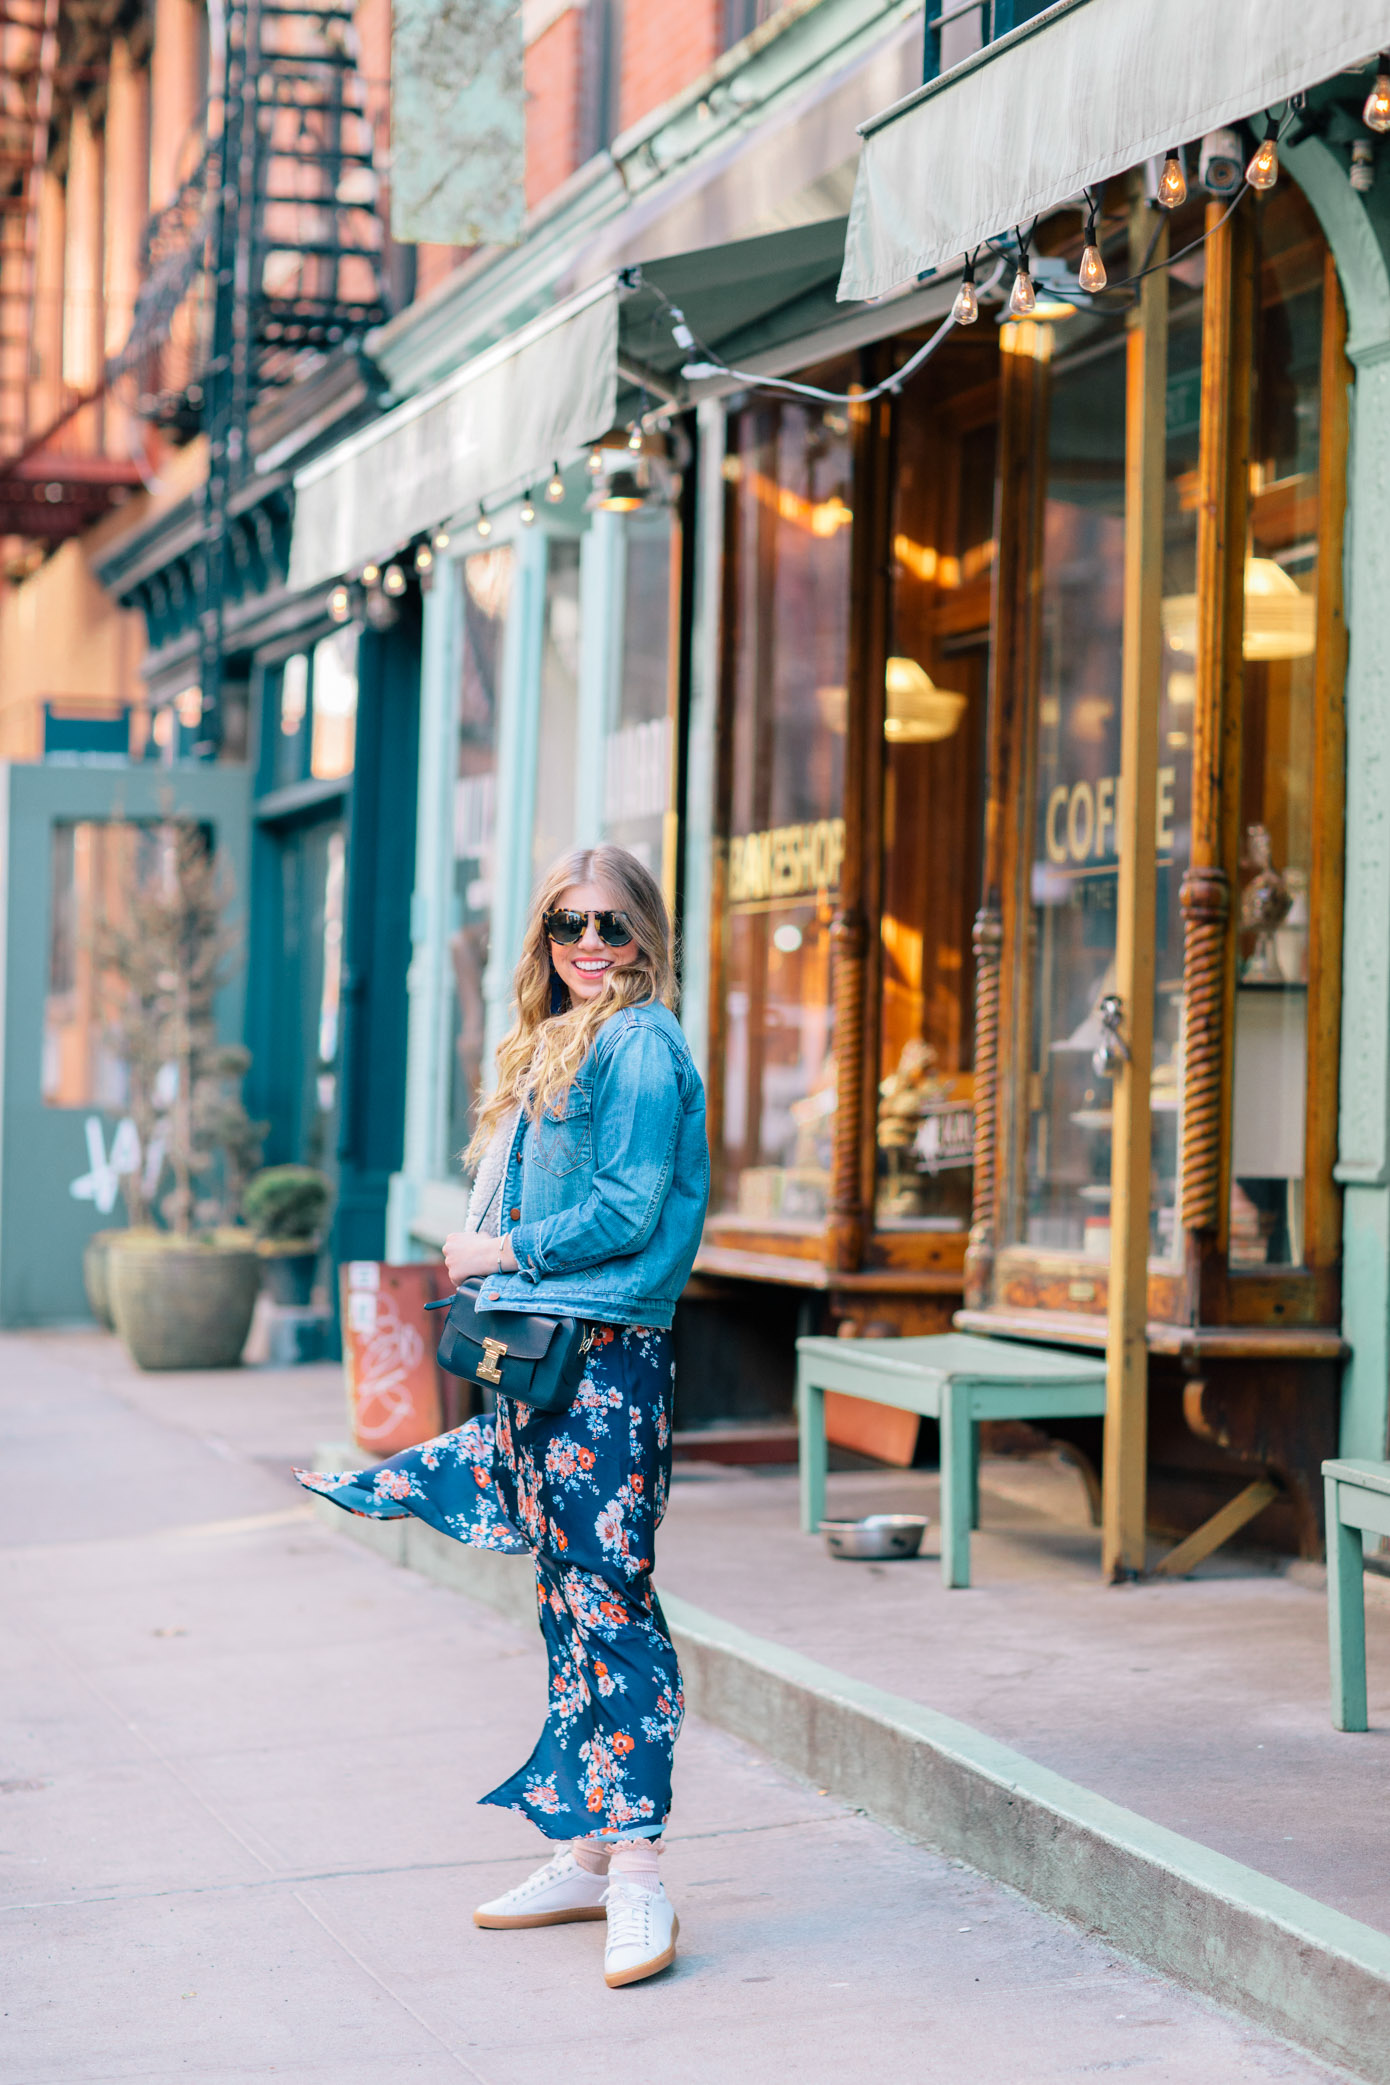 How to Wear Your Spring Dresses Now | Navy Floral Maxi Dress | Louella Reese Life & Style Blog 